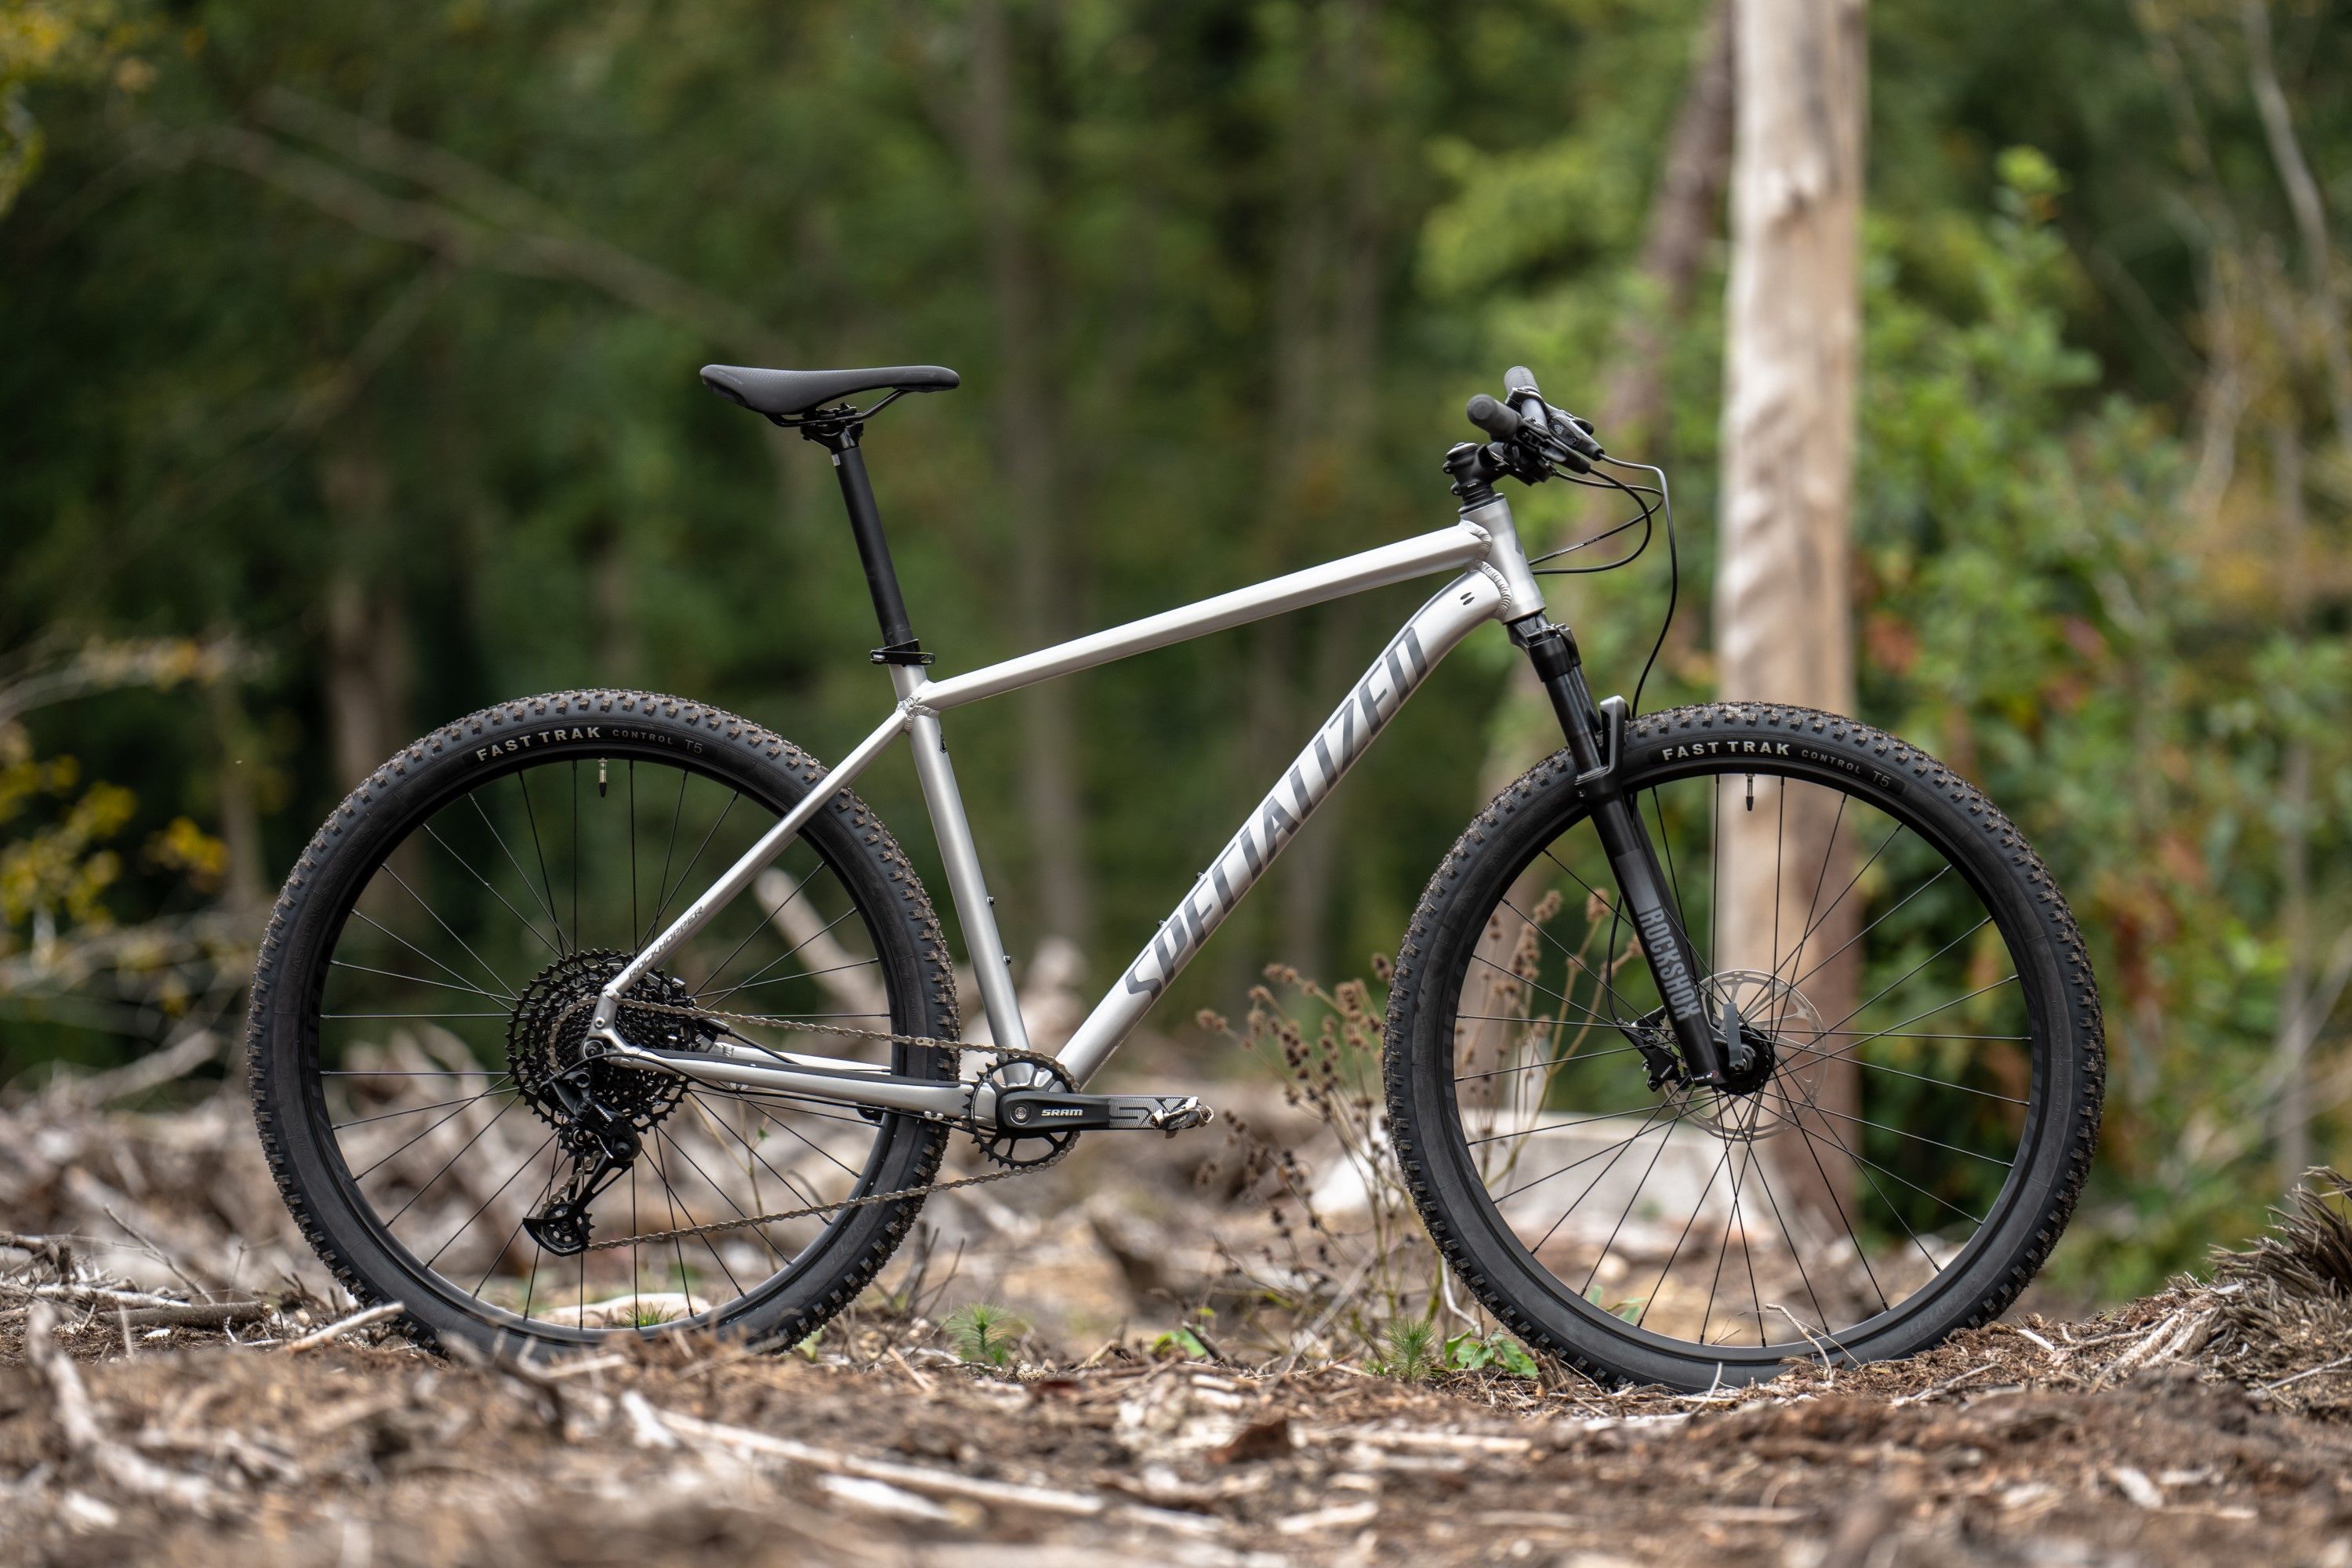 Toevoeging Bijlage projector Review: Specialized Rockhopper Expert 29 hardtail mountainbike